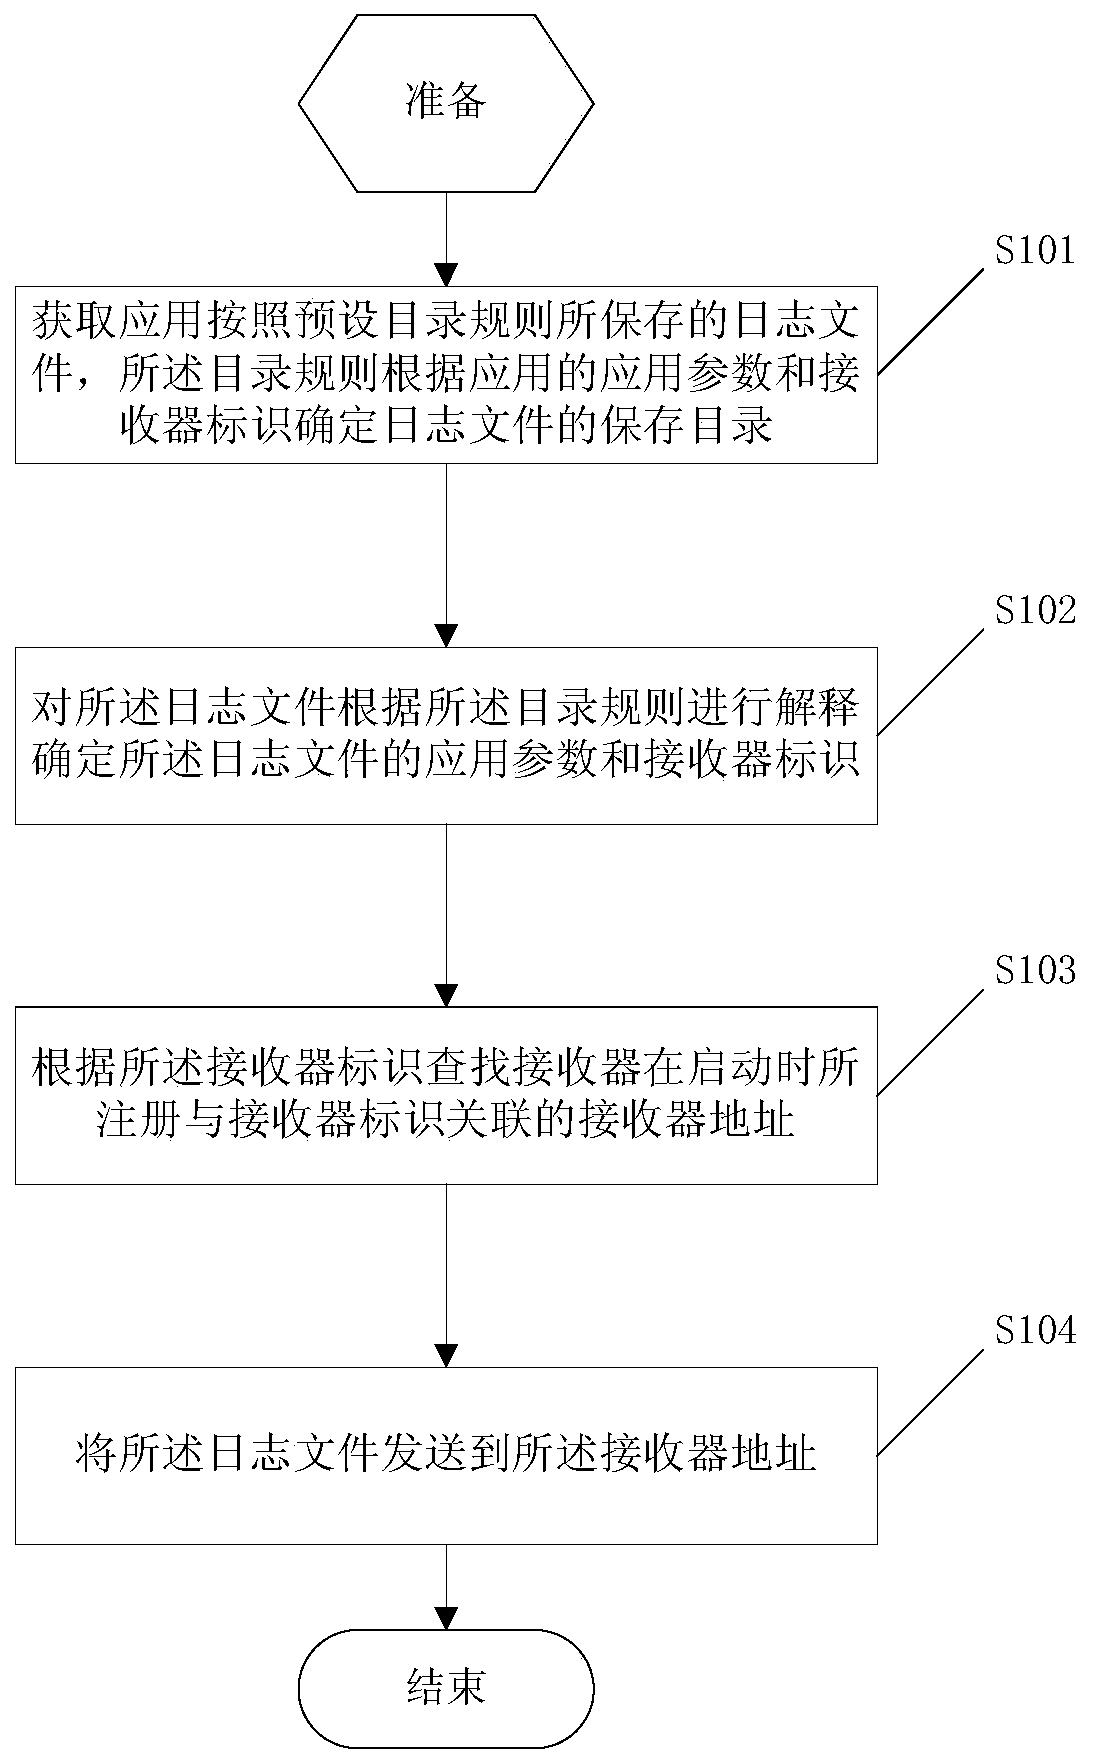 A log collection method and system